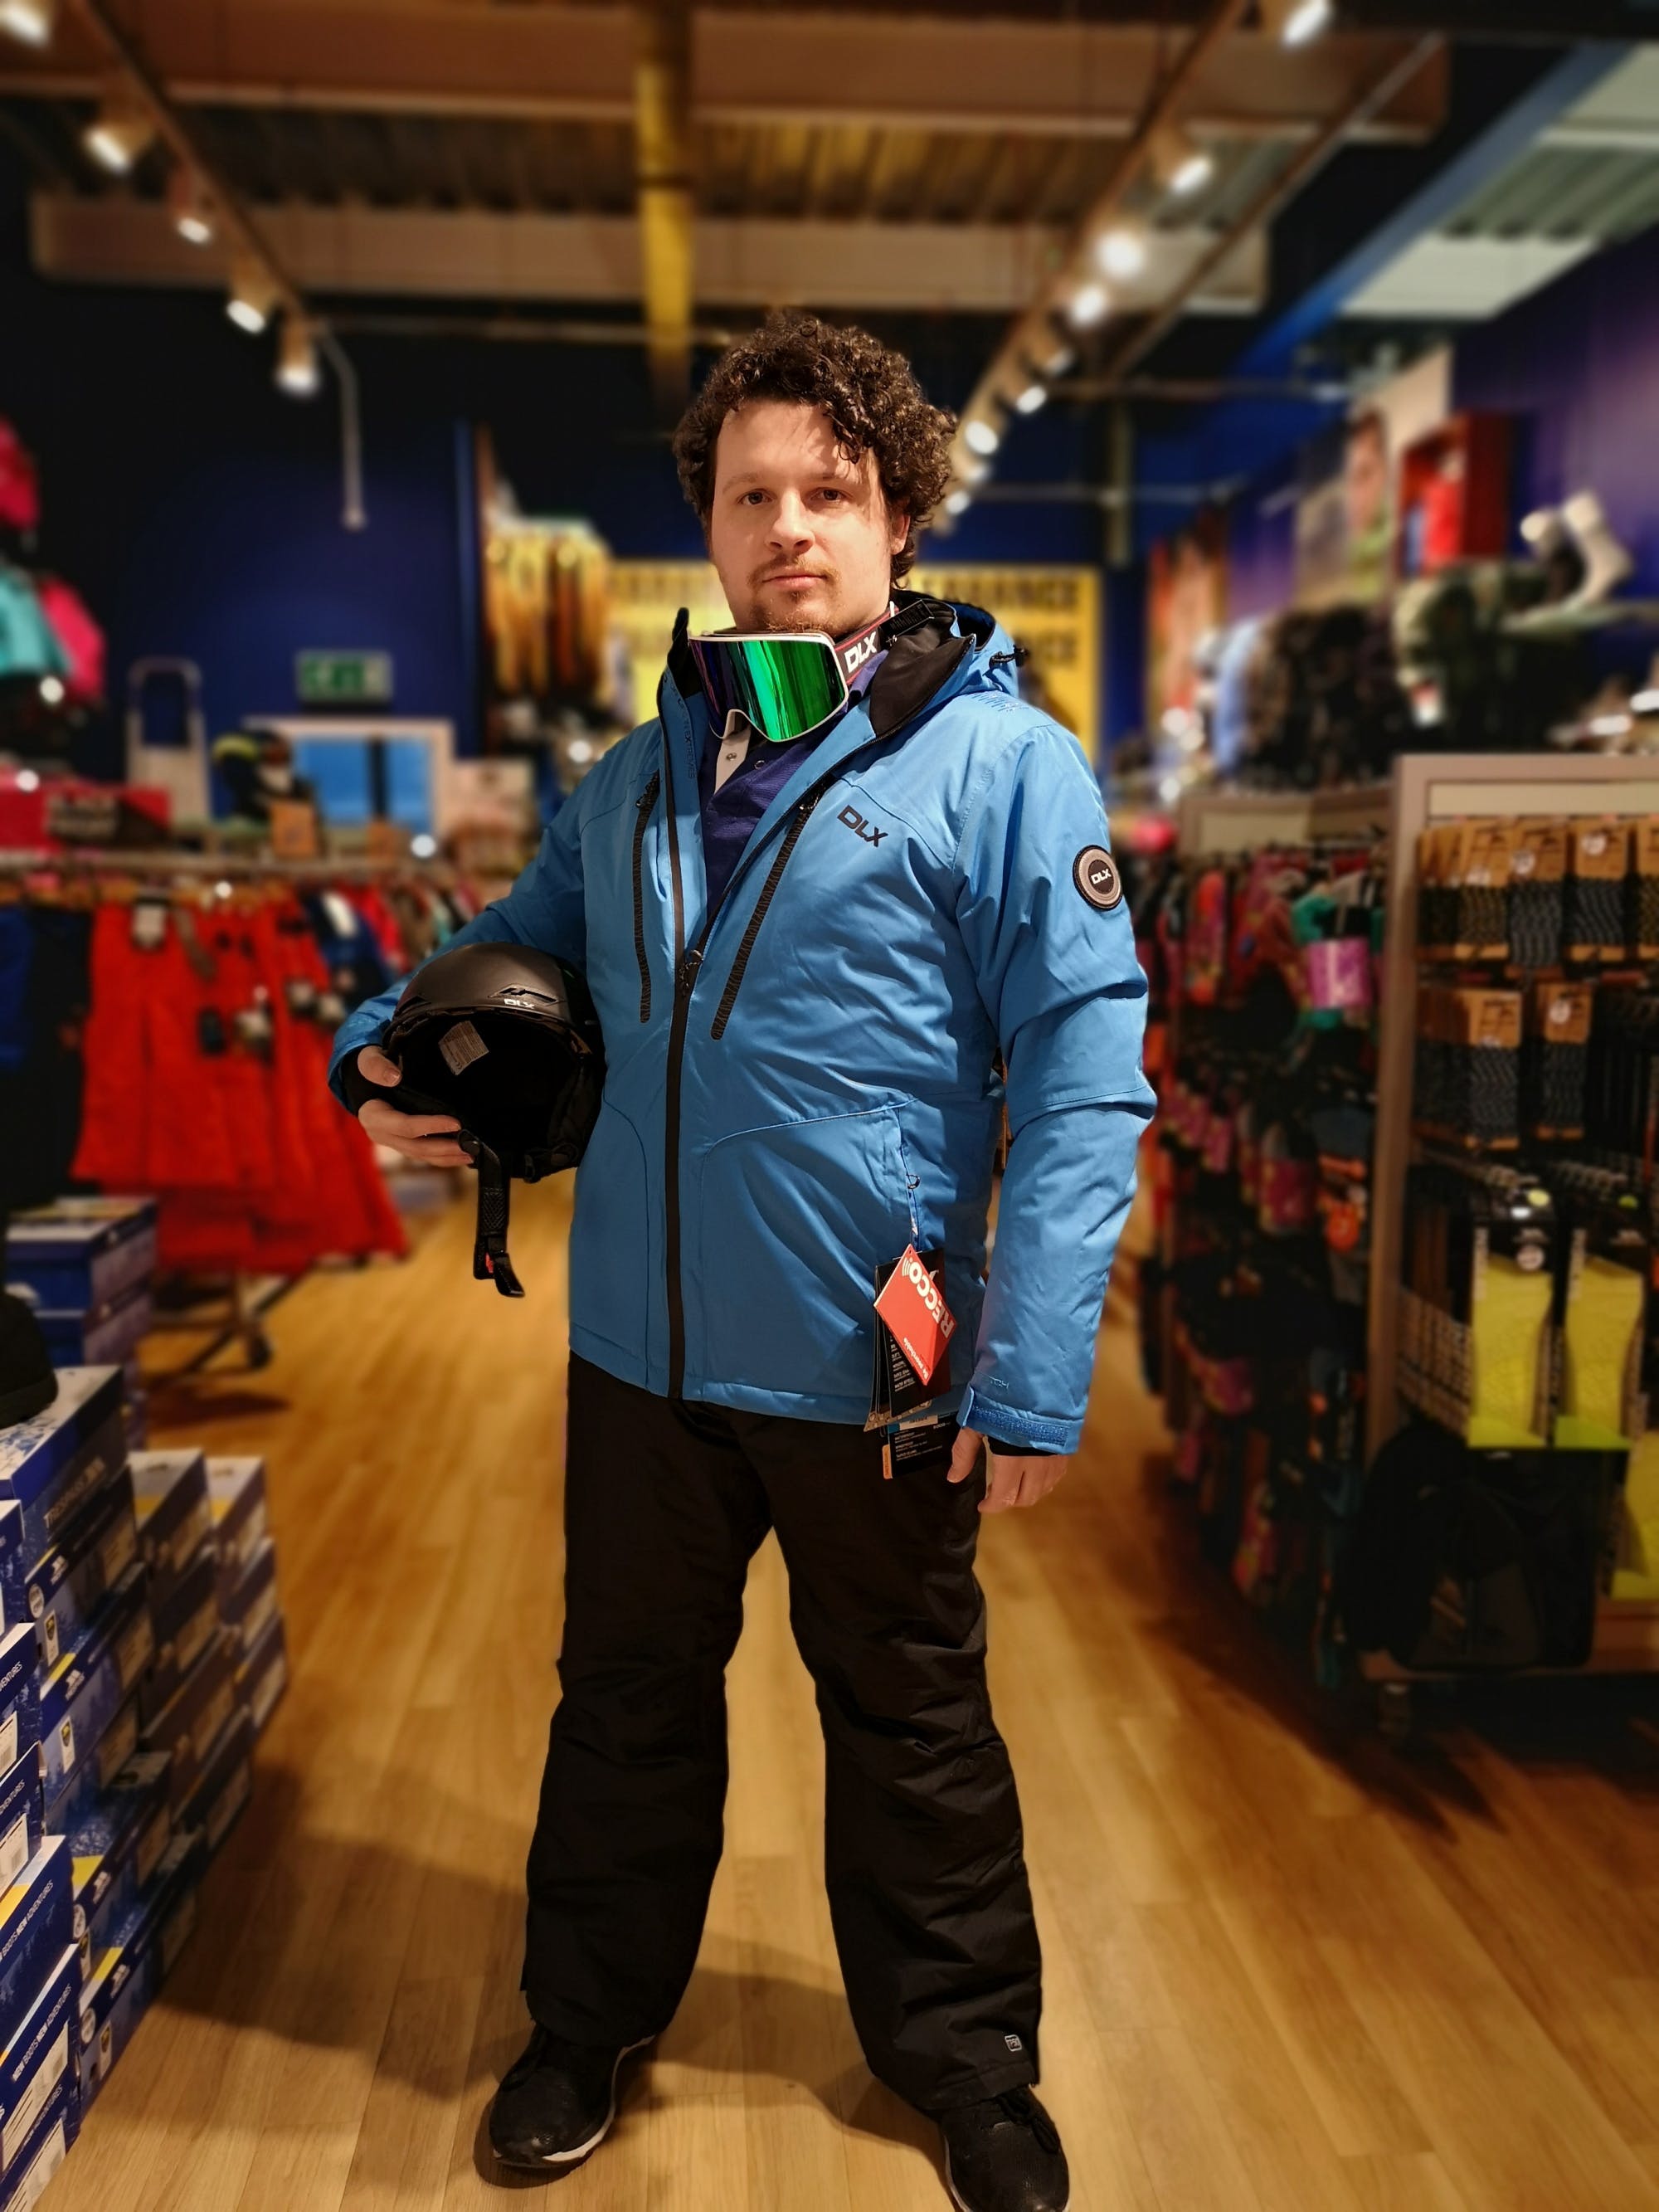 Xscape or alps, it's a piece of piste when buying skiing gear at TRESPASS jacket £164.99/trousers £44.99